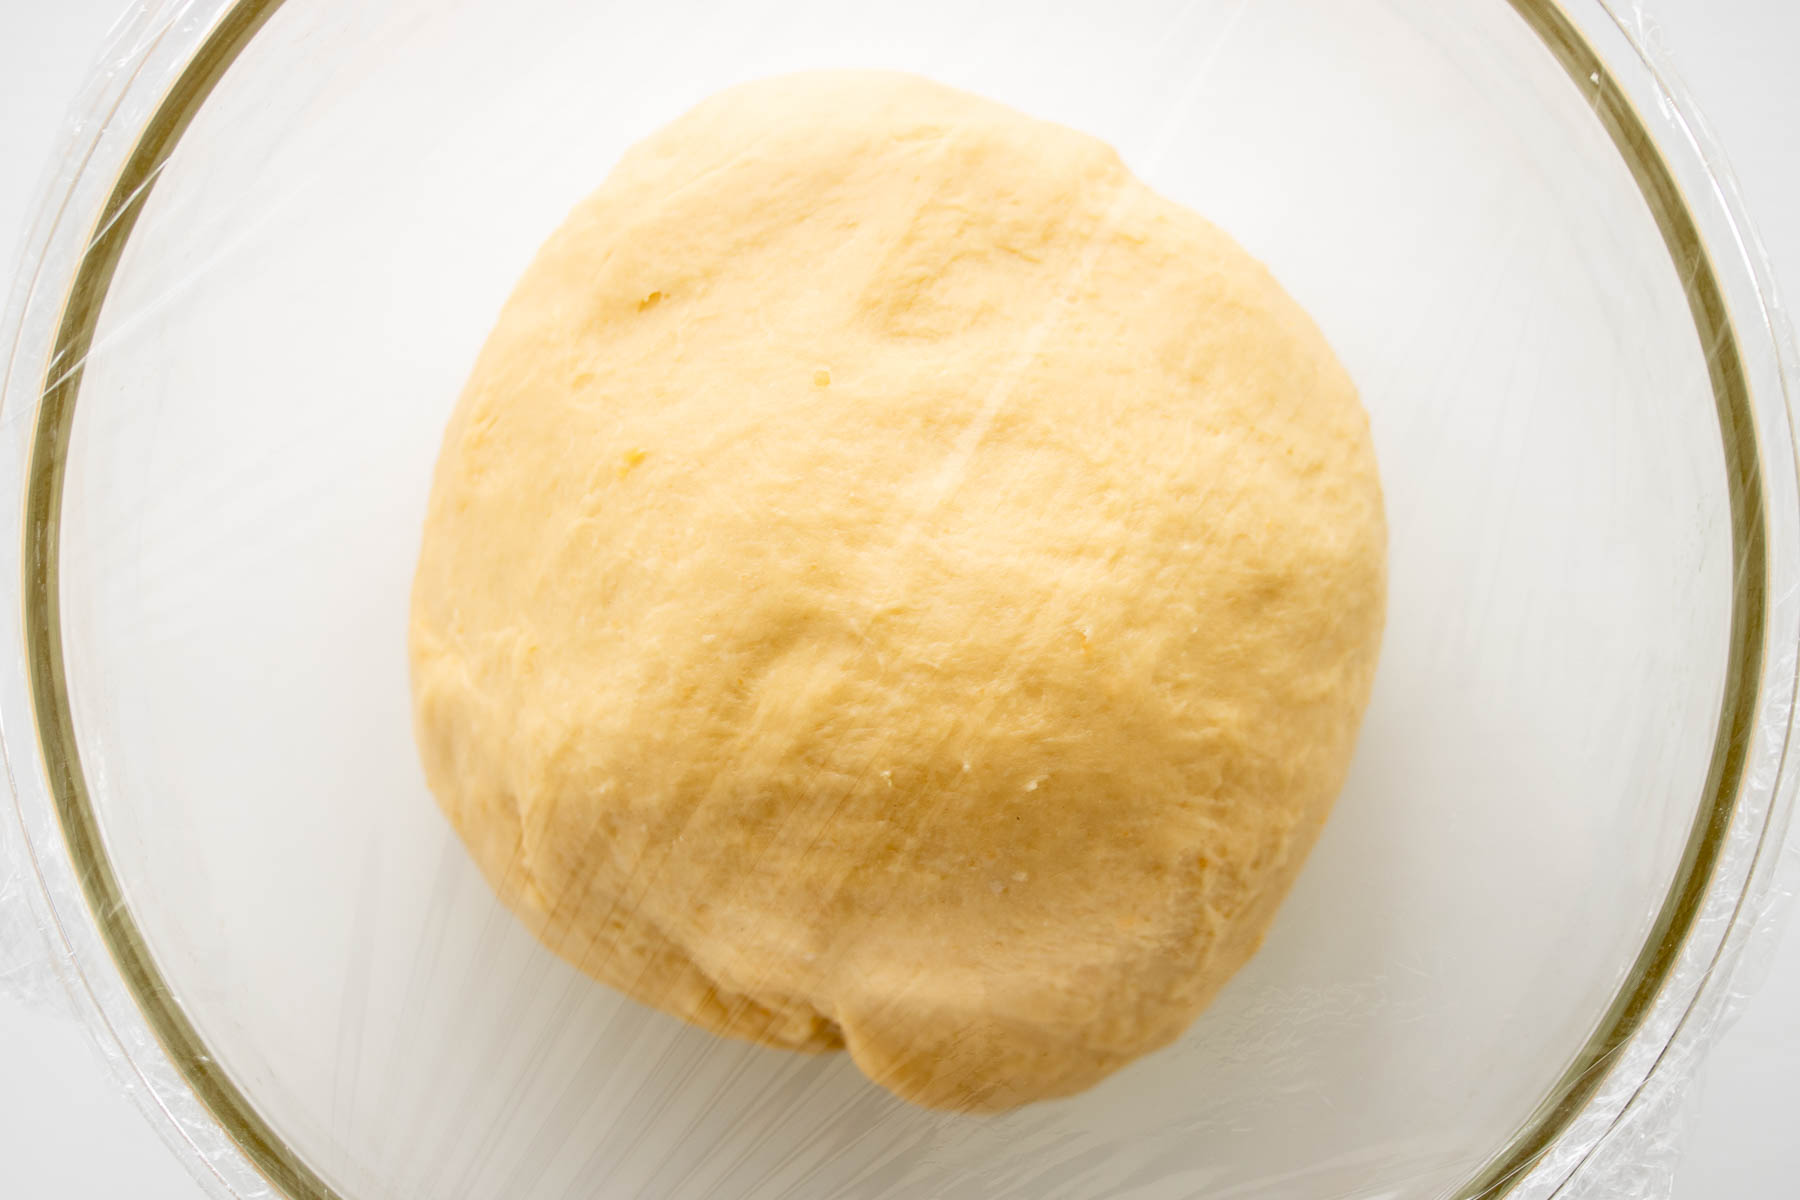 Dough before the first rise.